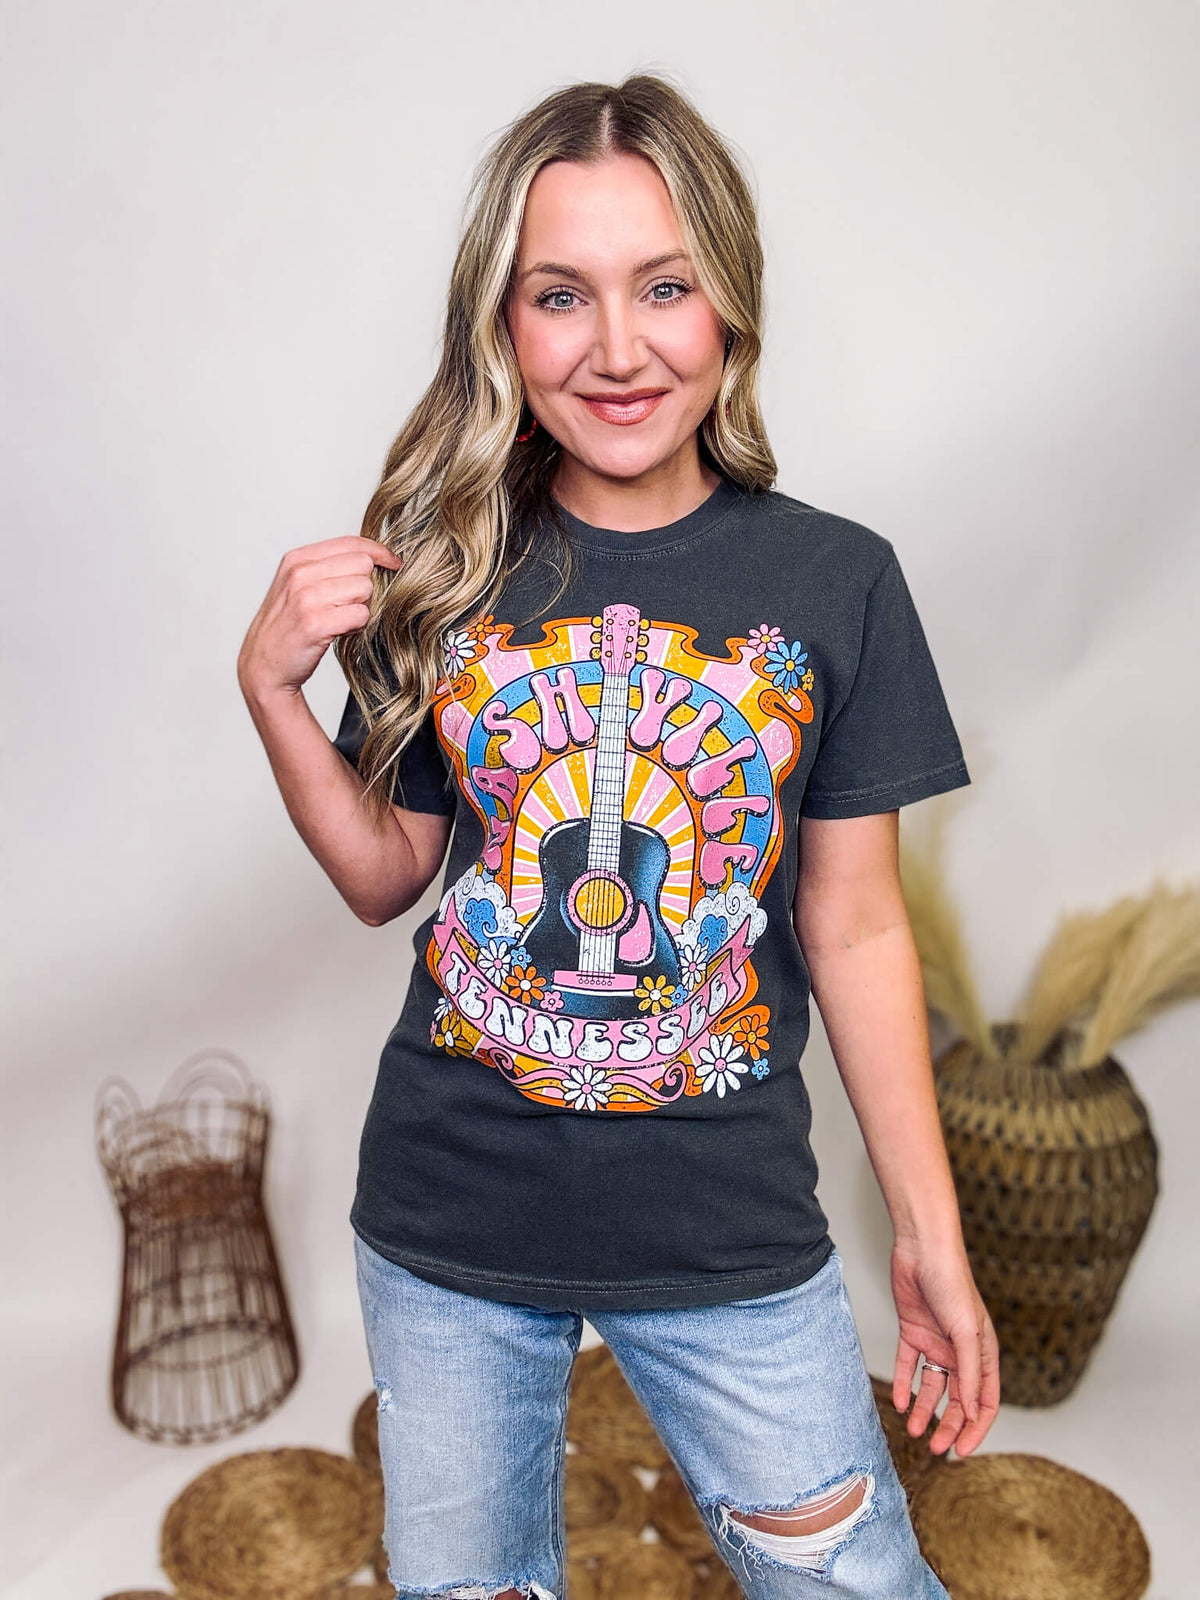 Golden Rose Co Retro Groovy Nashville Tennessee Guitar Graphic T-Shirt Relaxed Fit 100% Cotton